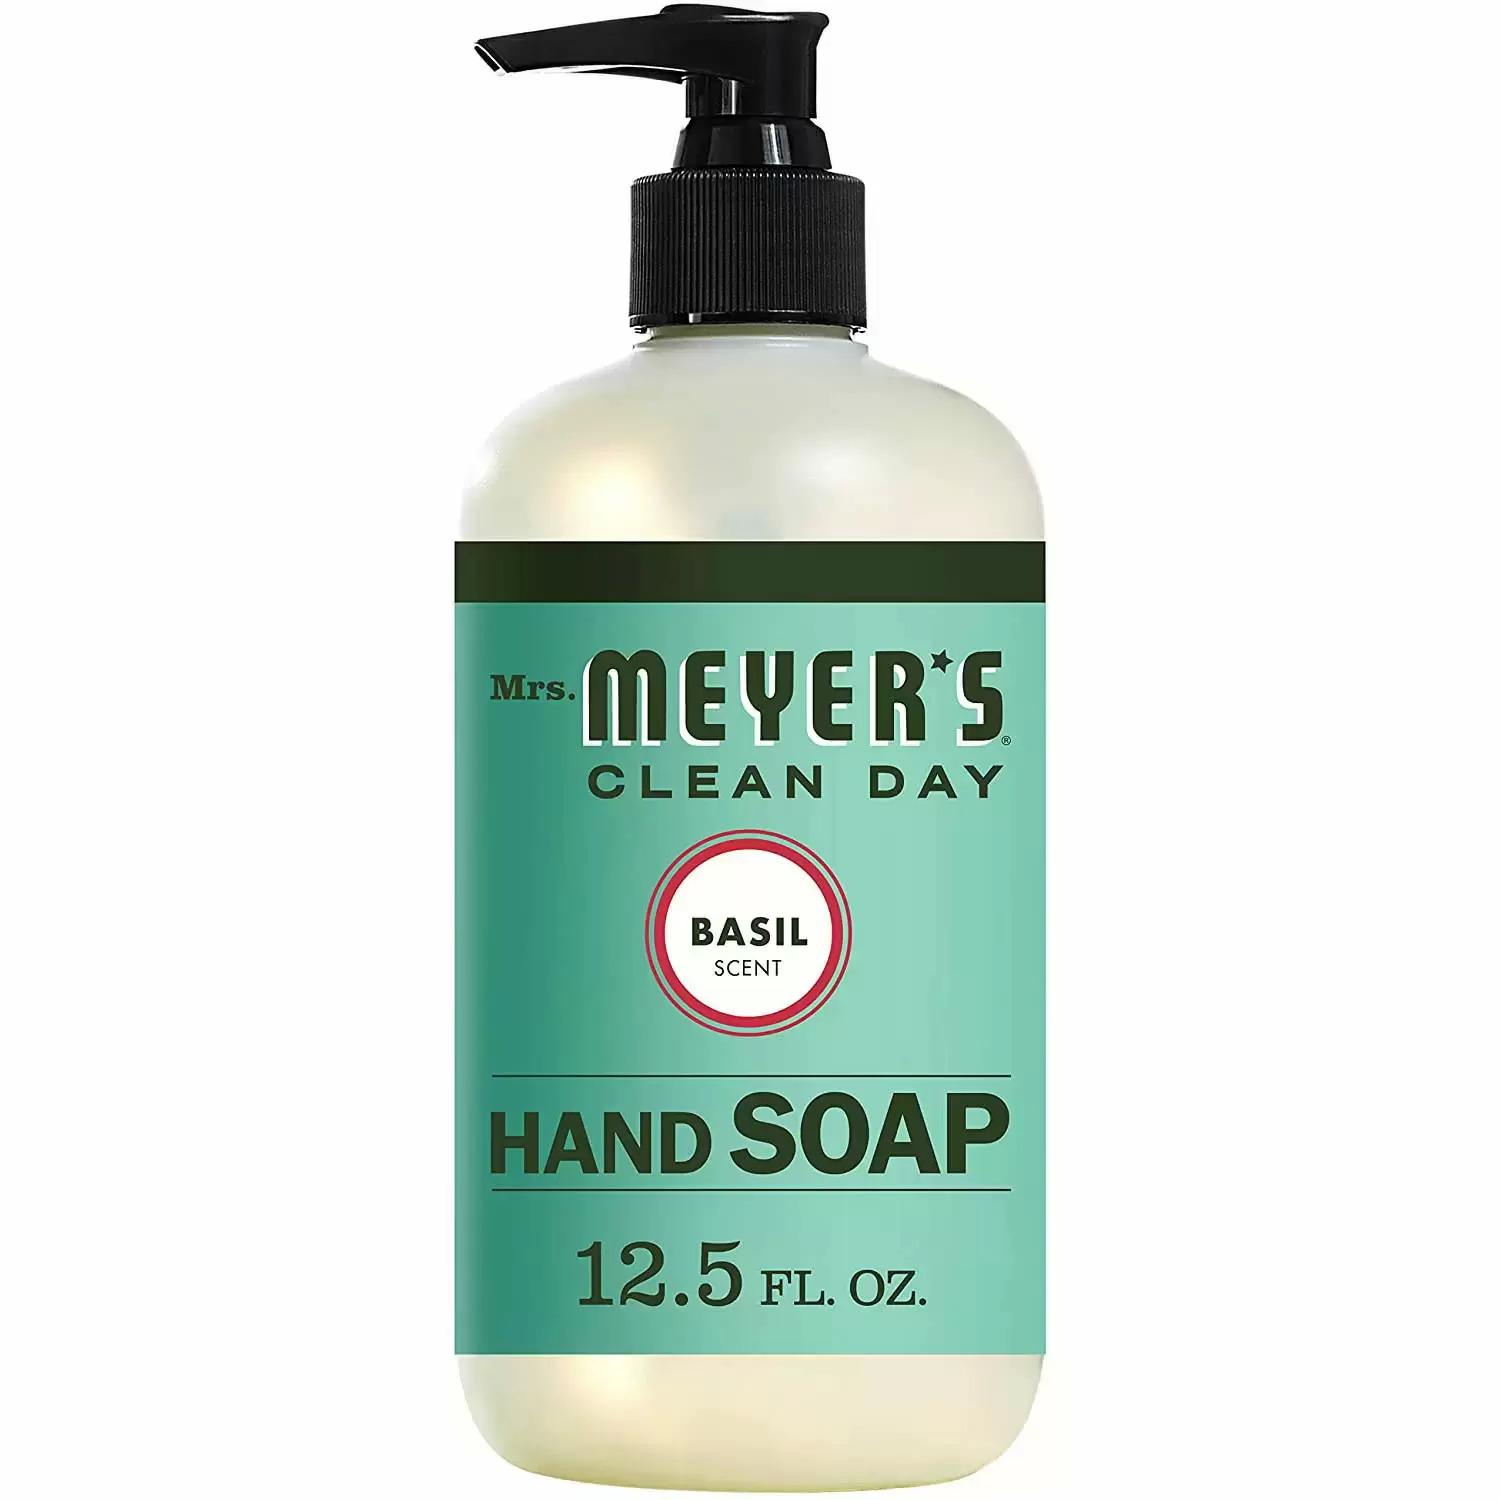 Mrs Meyers Clean Day Basil Liquid Hand Soap for $2.67 Shipped